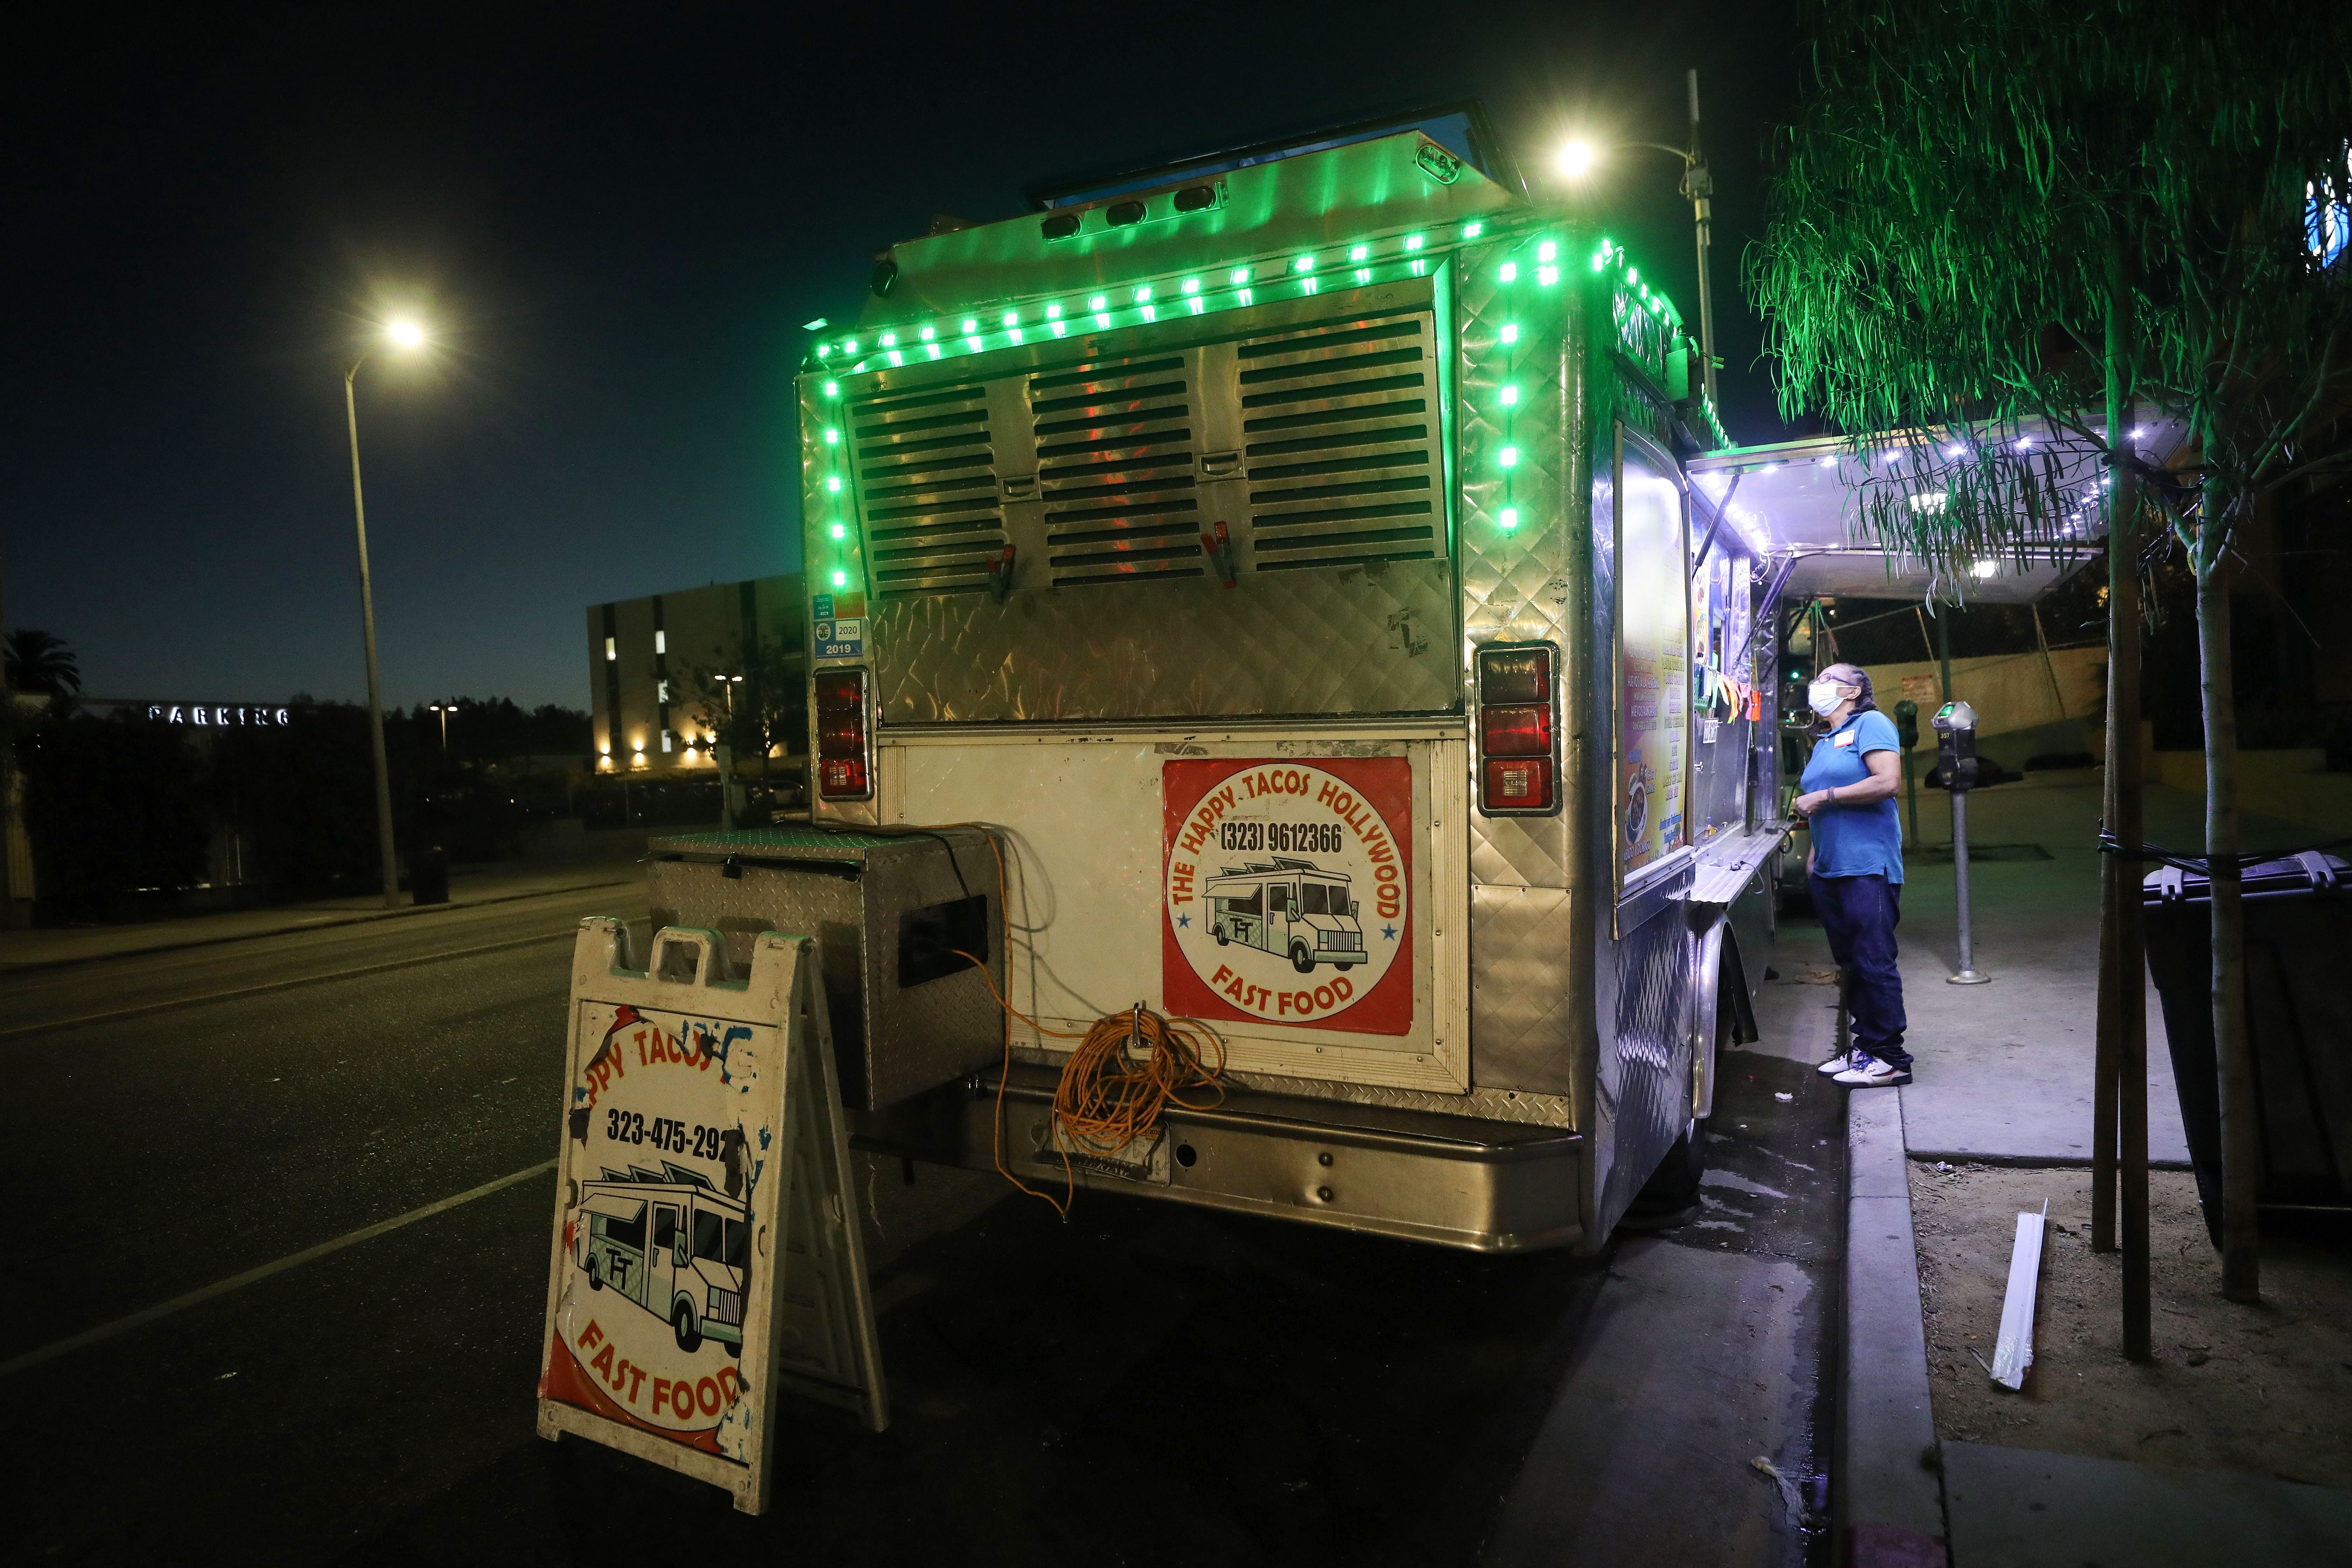 LOS ANGELES, CALIFORNIA - JULY 01: A customer orders from a taco truck amid the COVID-19 pandemic on July 1, 2020 in Los Angeles, California. California Governor Gavin Newsom ordered indoor dining restaurants to close again today in Los Angeles County and 18 other counties for at least three weeks amid a surge in new coronavirus cases. Restaurants and food trucks may remain open for takeout and drive-through orders. (Photo by Mario Tama/Getty Images)